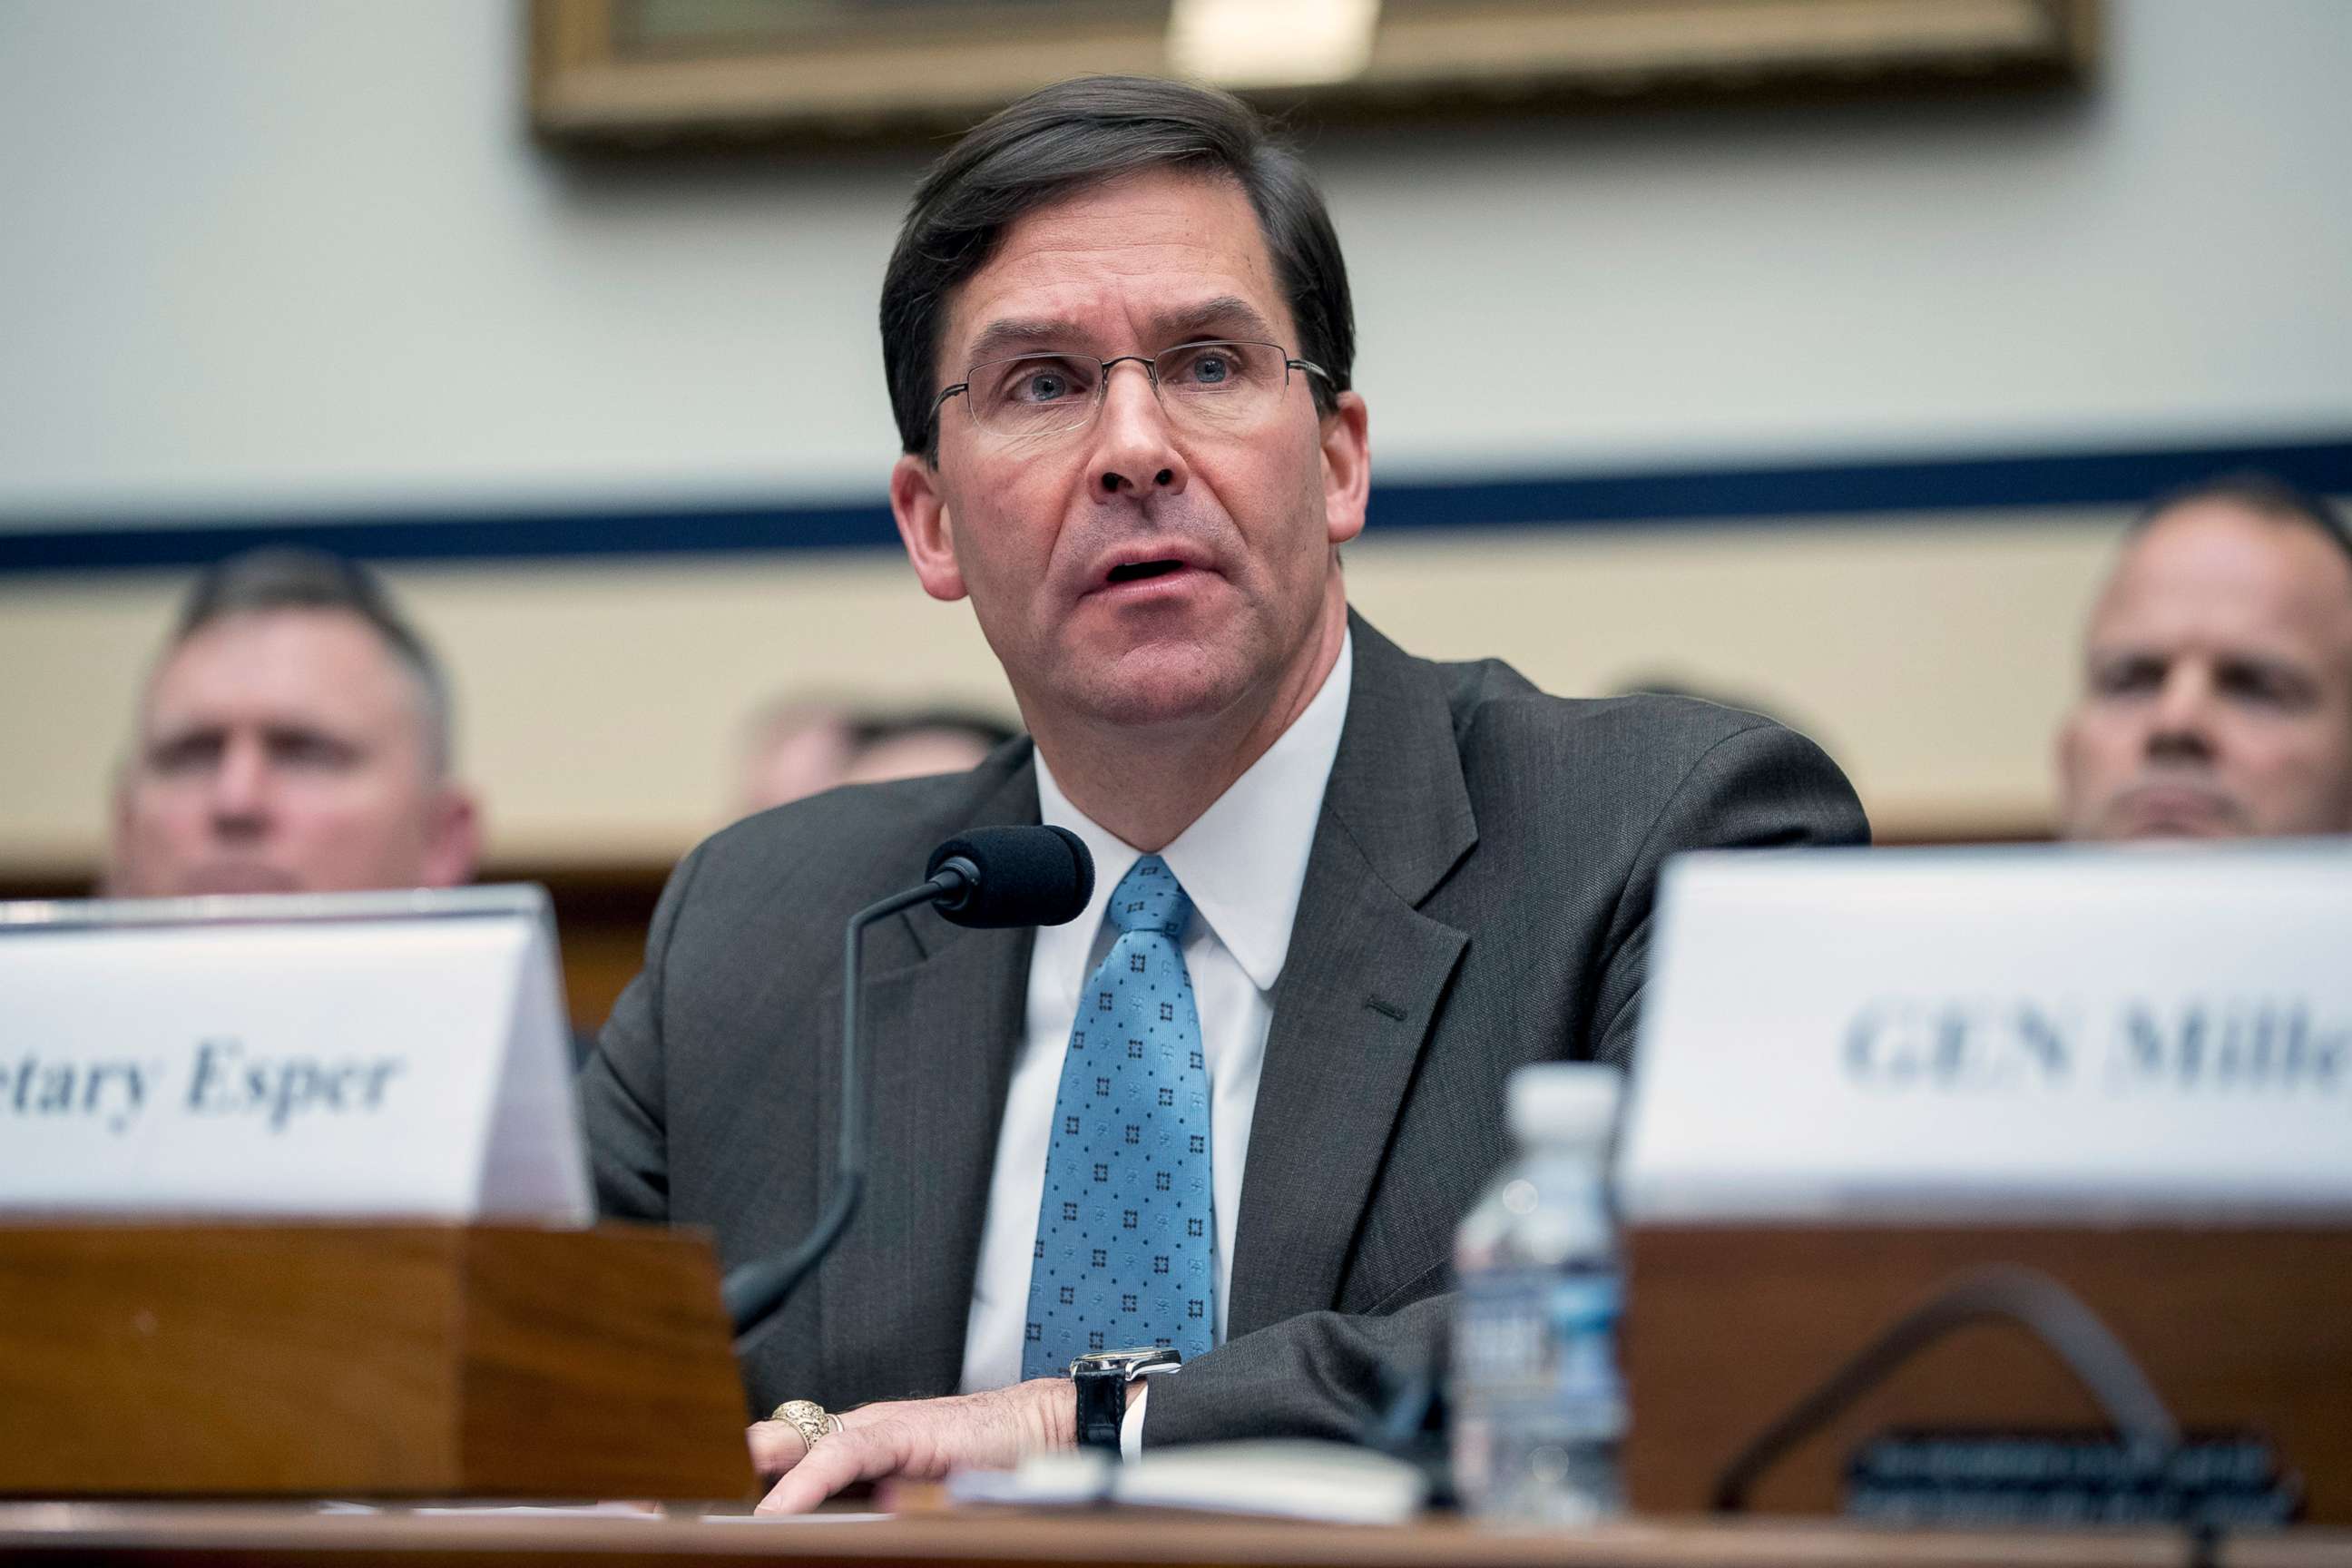 PHOTO: In this April 2, 2019, file photo, Secretary of the Army Mark Esper speaks during a House Armed Services Committee budget hearing on Capitol Hill in Washington, D.C.